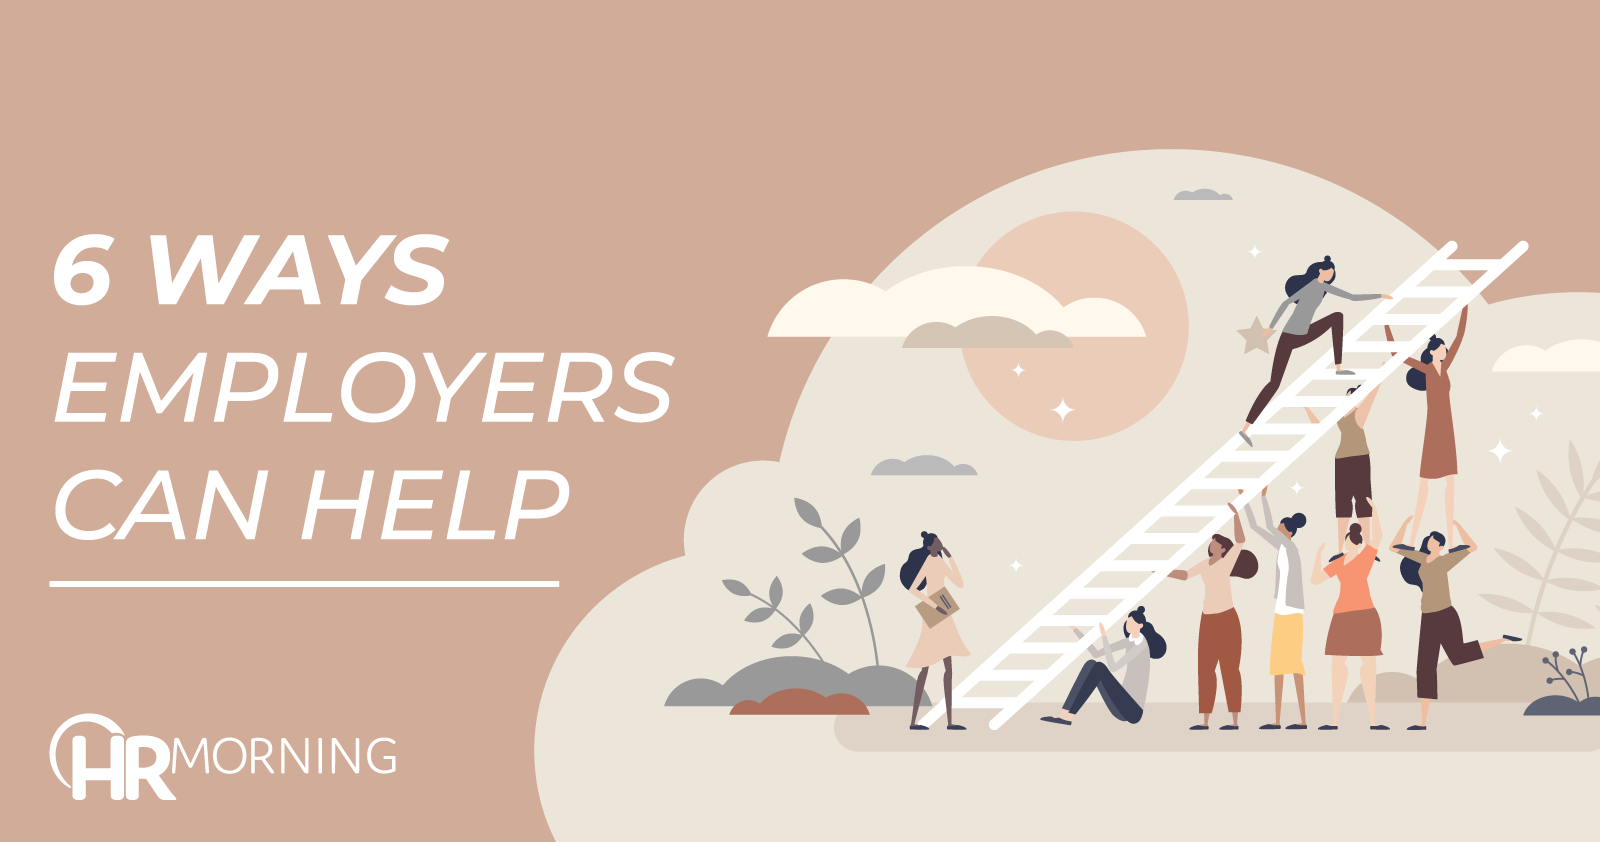 6 Ways Employers Can Help